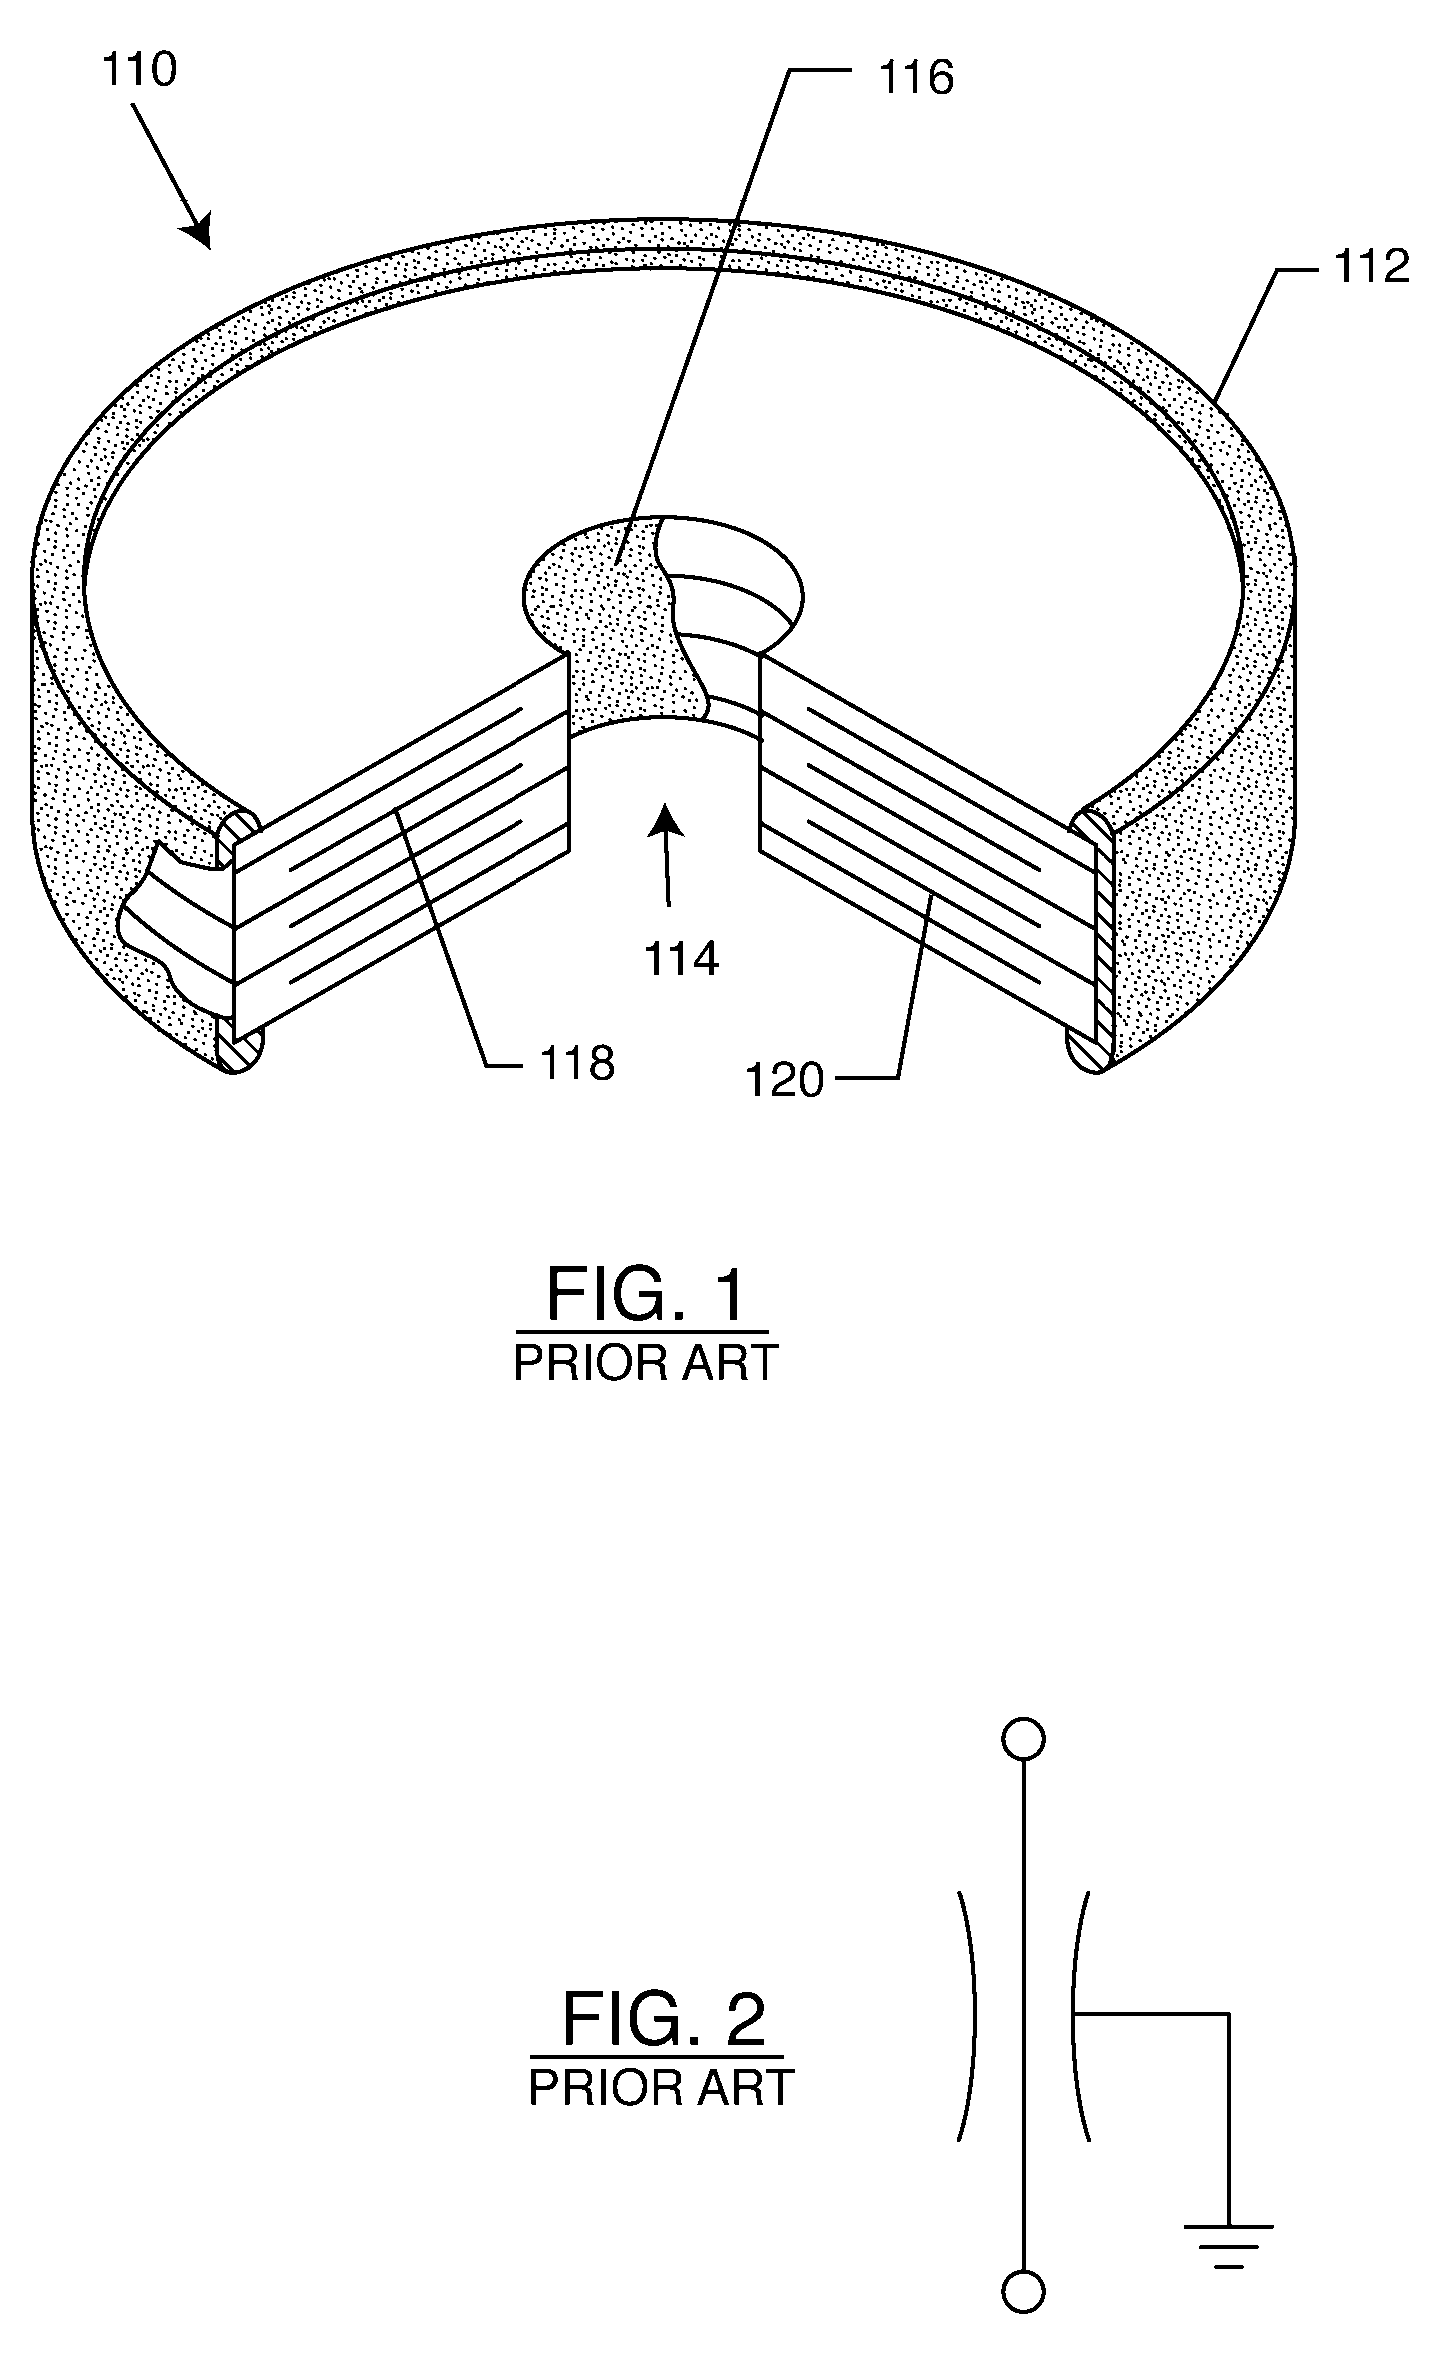 Hermetic feedthrough terminal assembly with wire bond pads for human implant applications